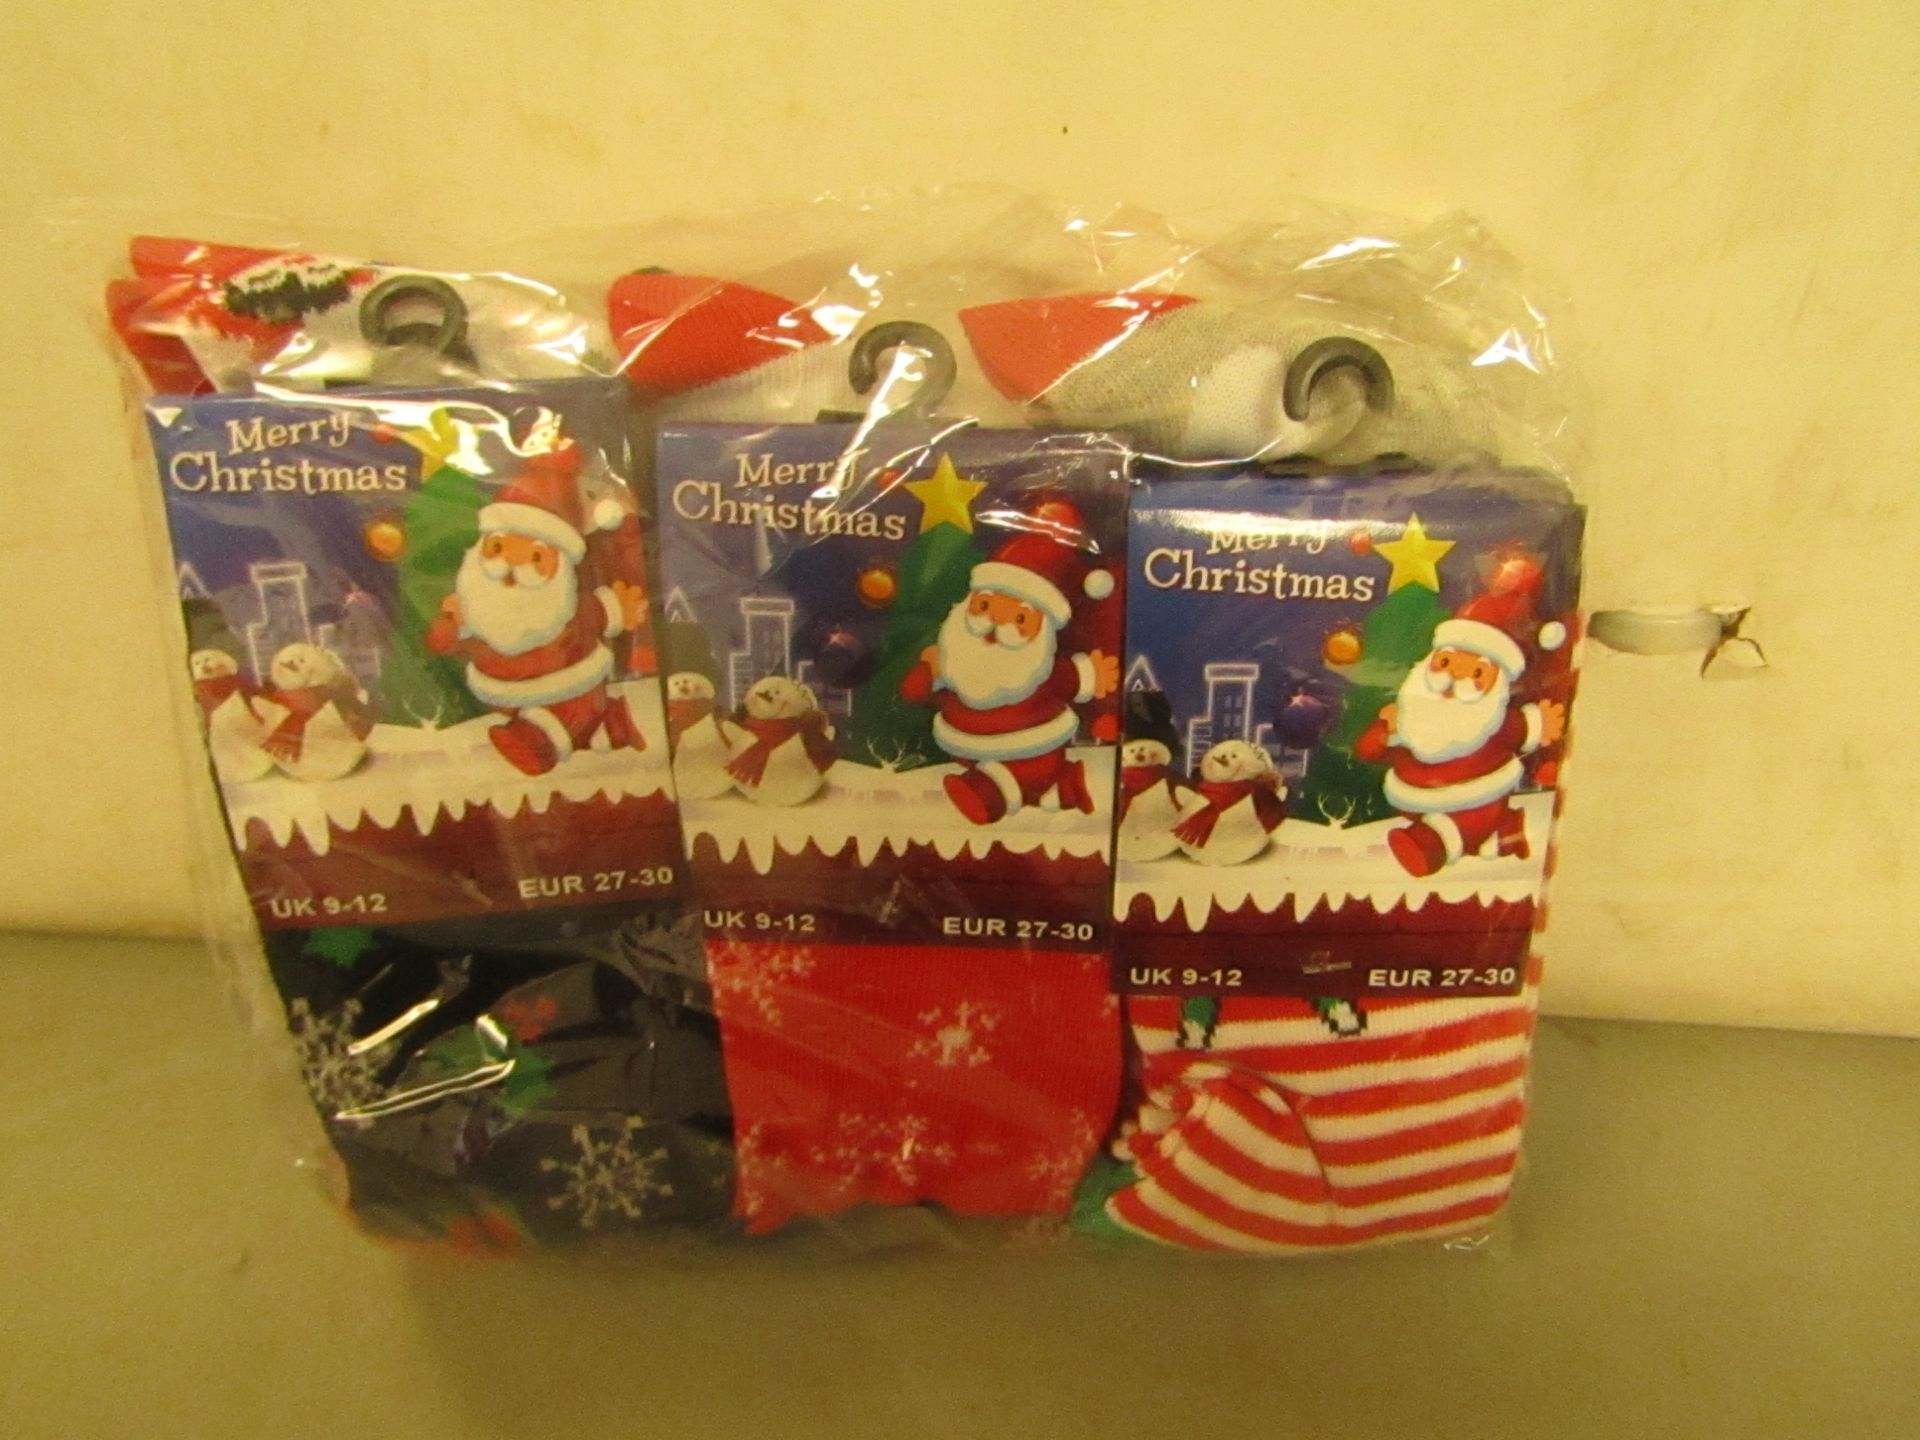 12 X Pairs of Christmas Themed Socks Size 9-12 New & Packaged